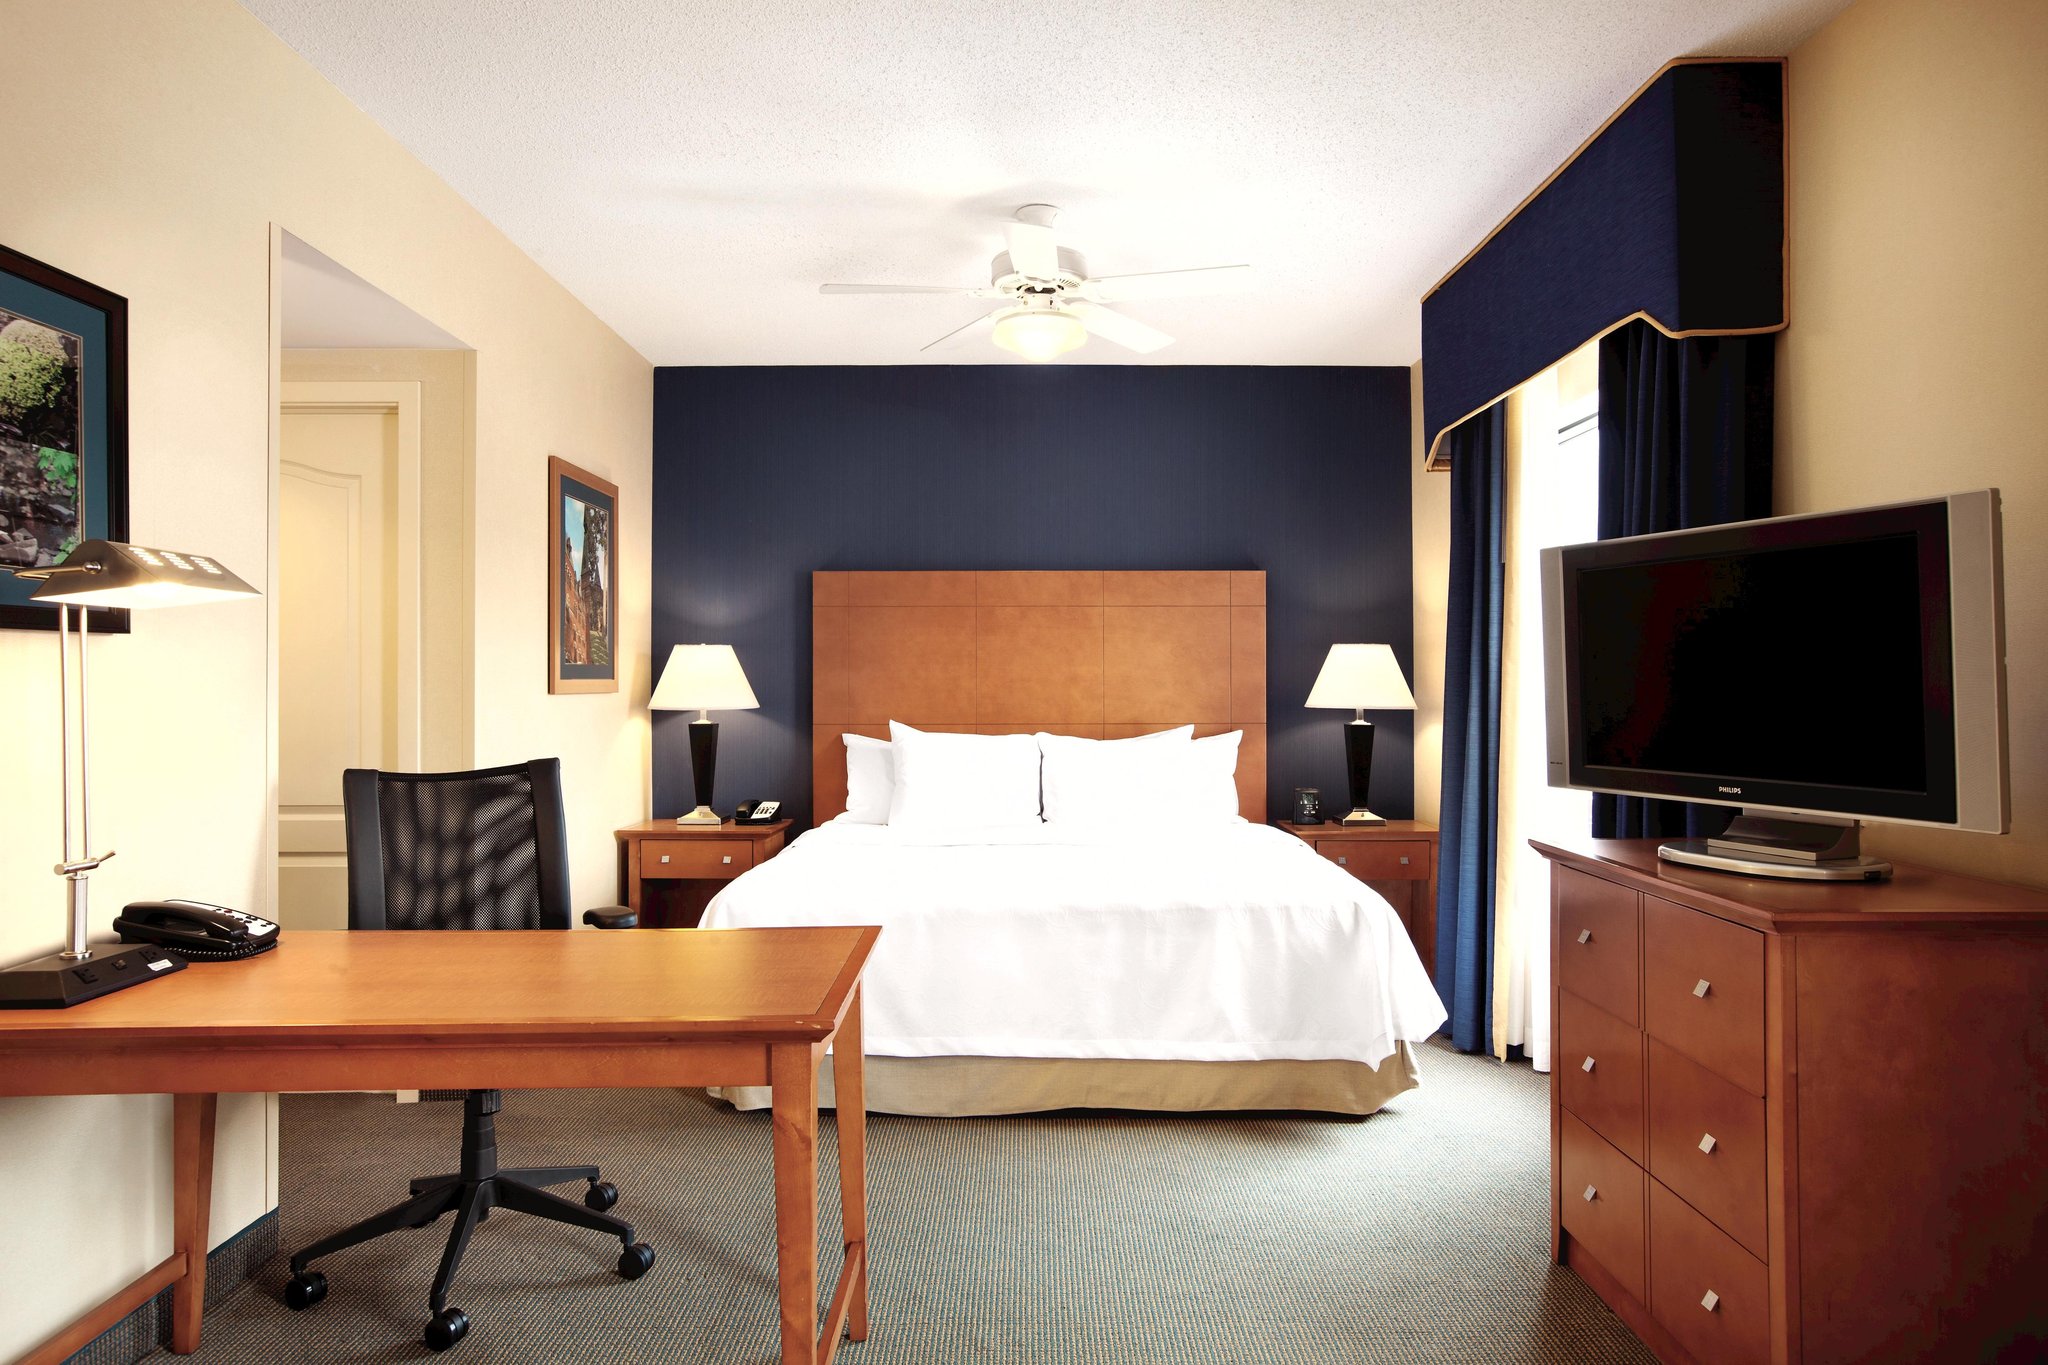 Homewood Suites by Hilton Ithaca